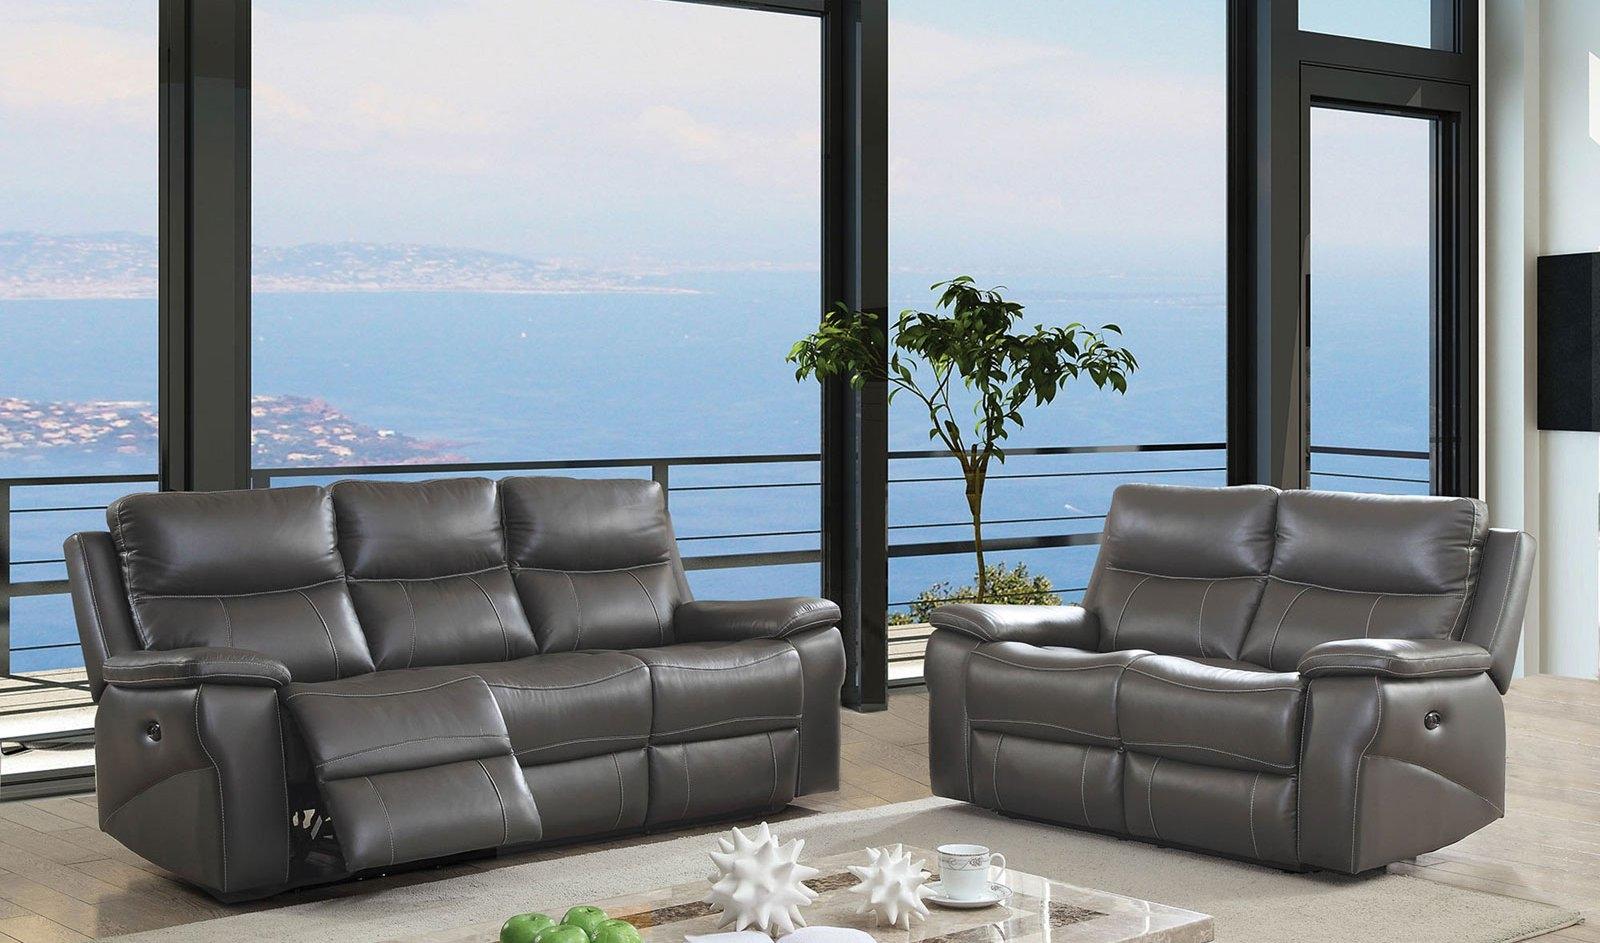 Transitional Recliner Sofa Loveseat and Chair CM6540-3PC Lila CM6540-3PC in Gray Top grain leather